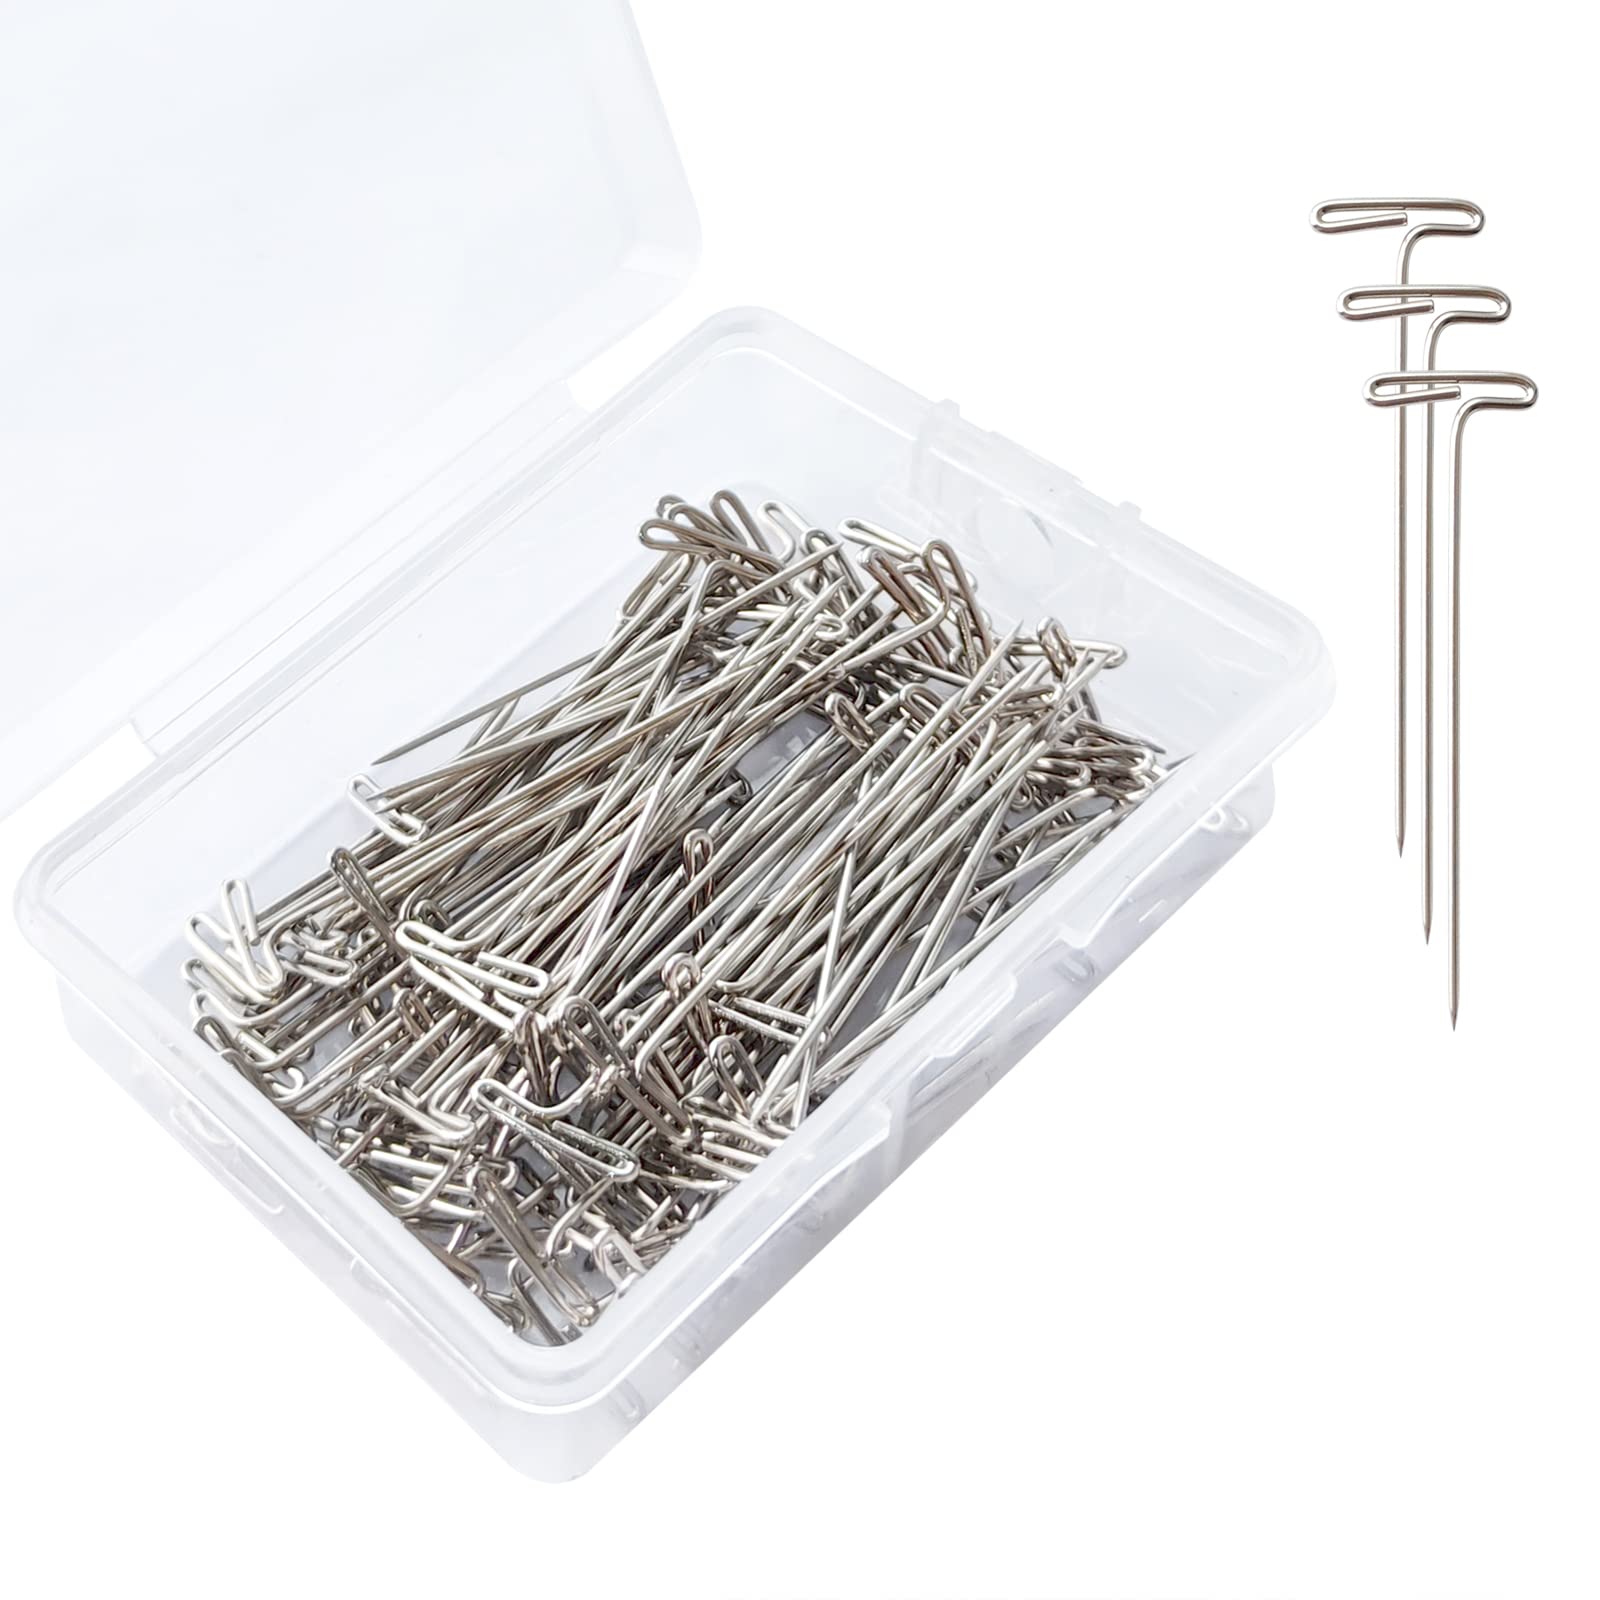 Mr. Pen- T Pins, 220 Pack, Assorted Sizes, T-Pins, T Pins for Blocking Knitting, Wig Pins, T Pins for Wigs, Wig Pins for Foam Head, T Pins for